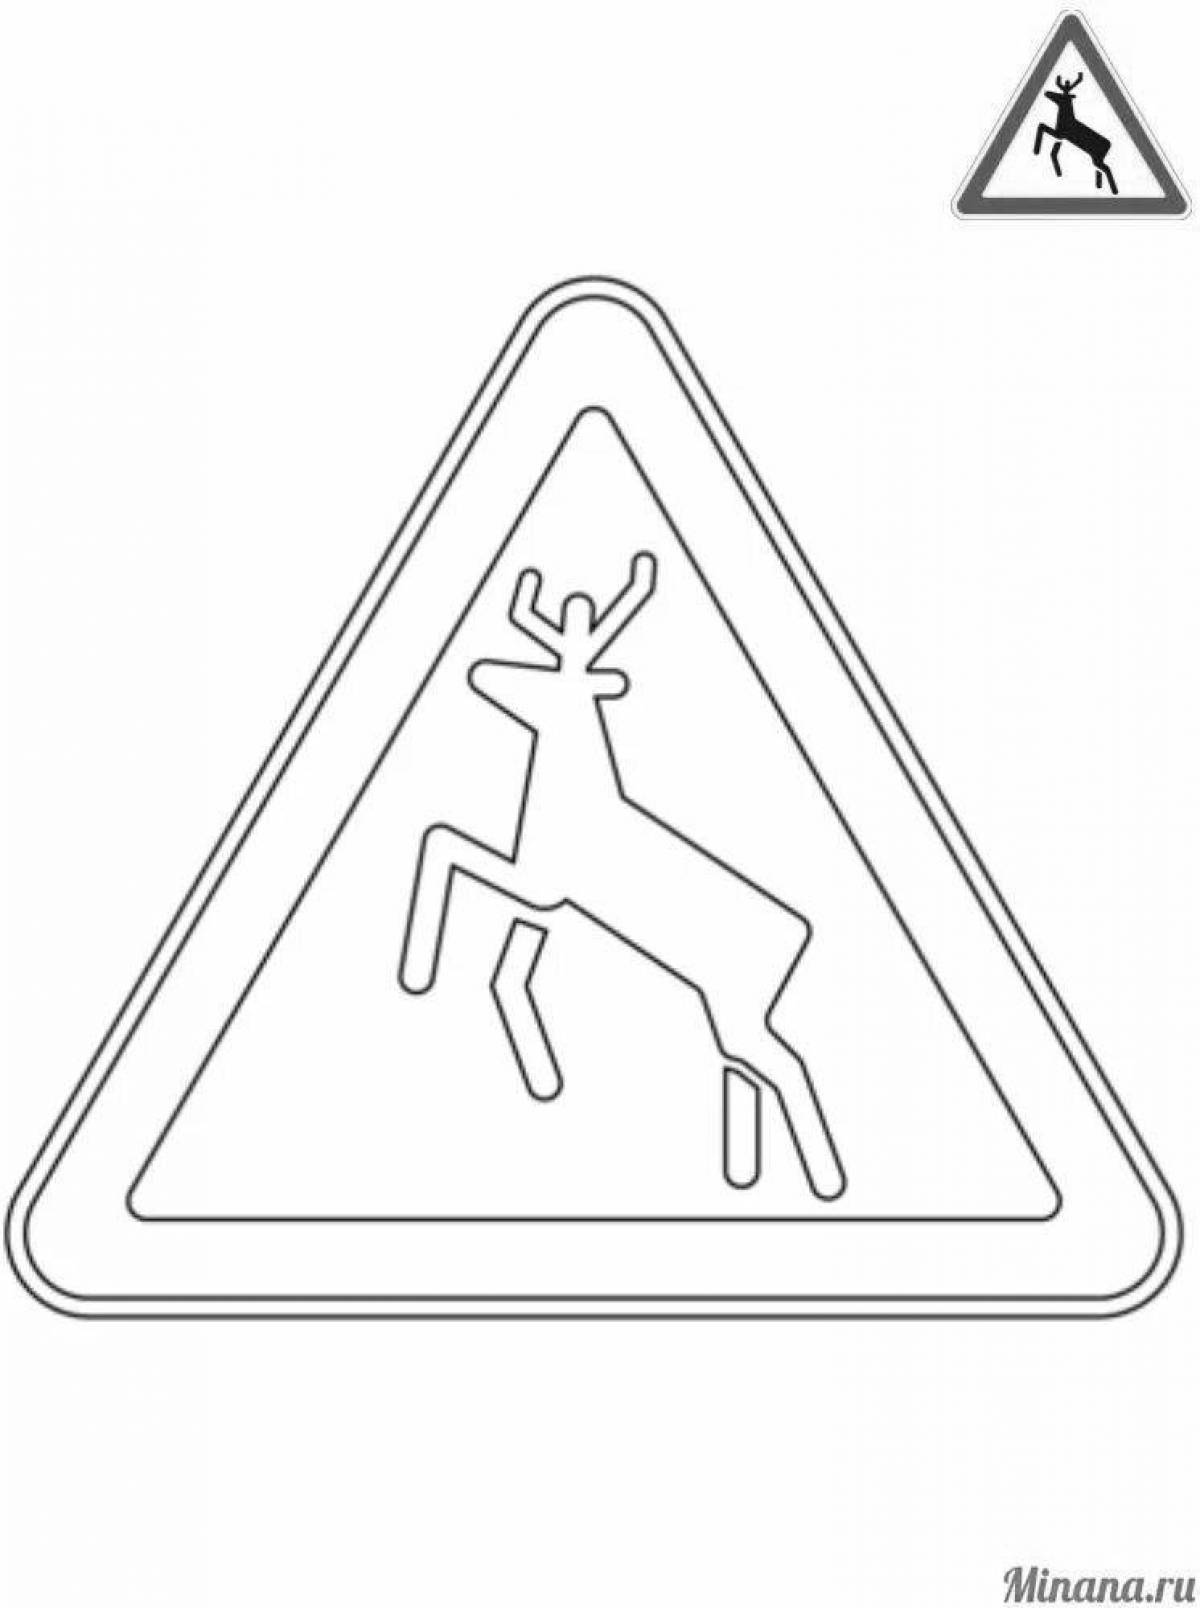 Coloring page lovely caution kids sign